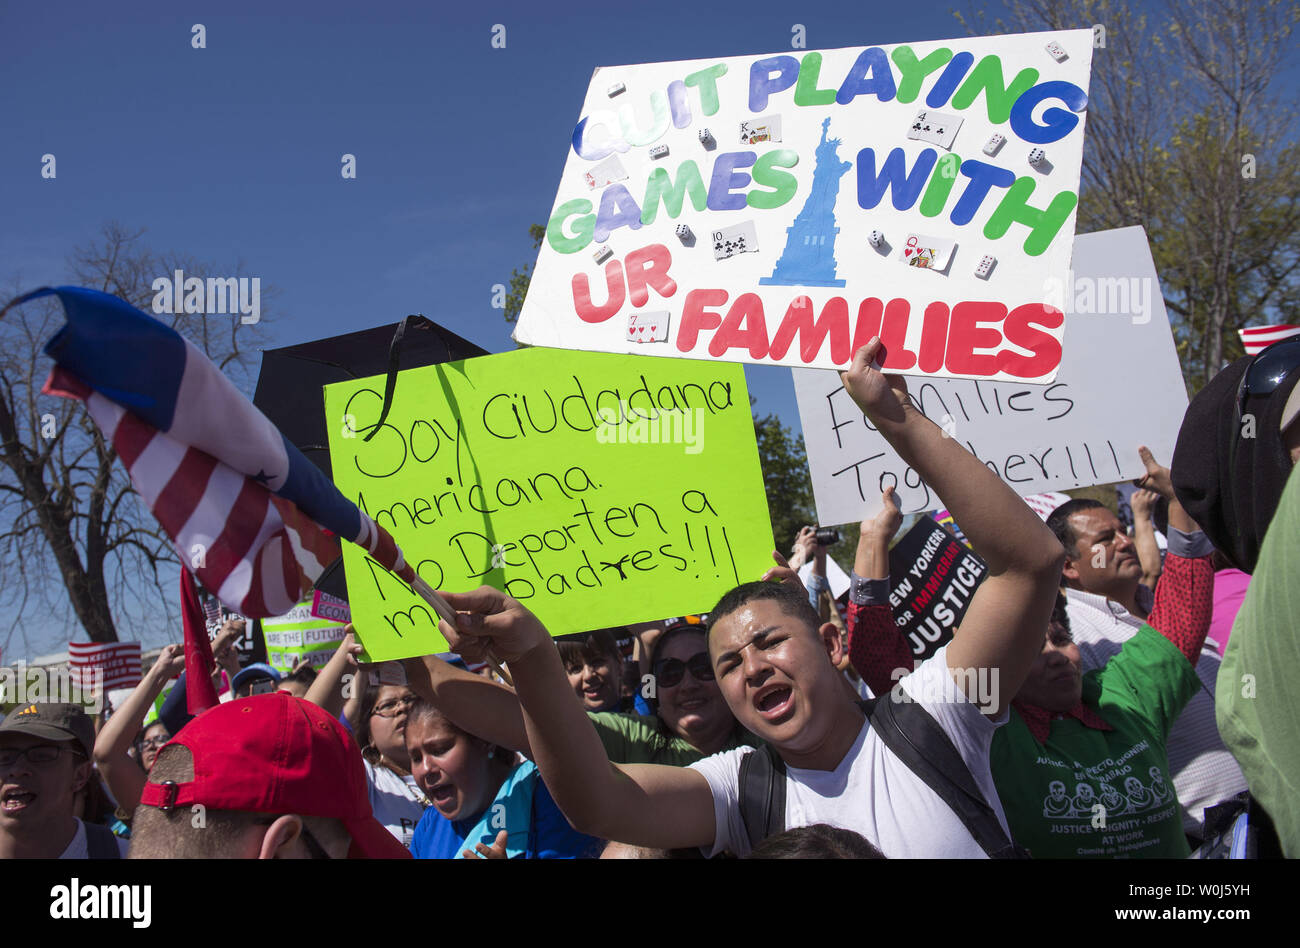 Protesters gather outside of the Supreme Court as the Court hears oral arguments in the case of United States v. Texas, which will consider a legal challenge to the Deferred Action for Parents of Americans (DAPA) program and the expansion of the Deferred Action for Childhood Arrivals (DACA) program, in Washington, D.C. on April 18, 2016. Photo by Kevin Dietsch/UPI Stock Photo